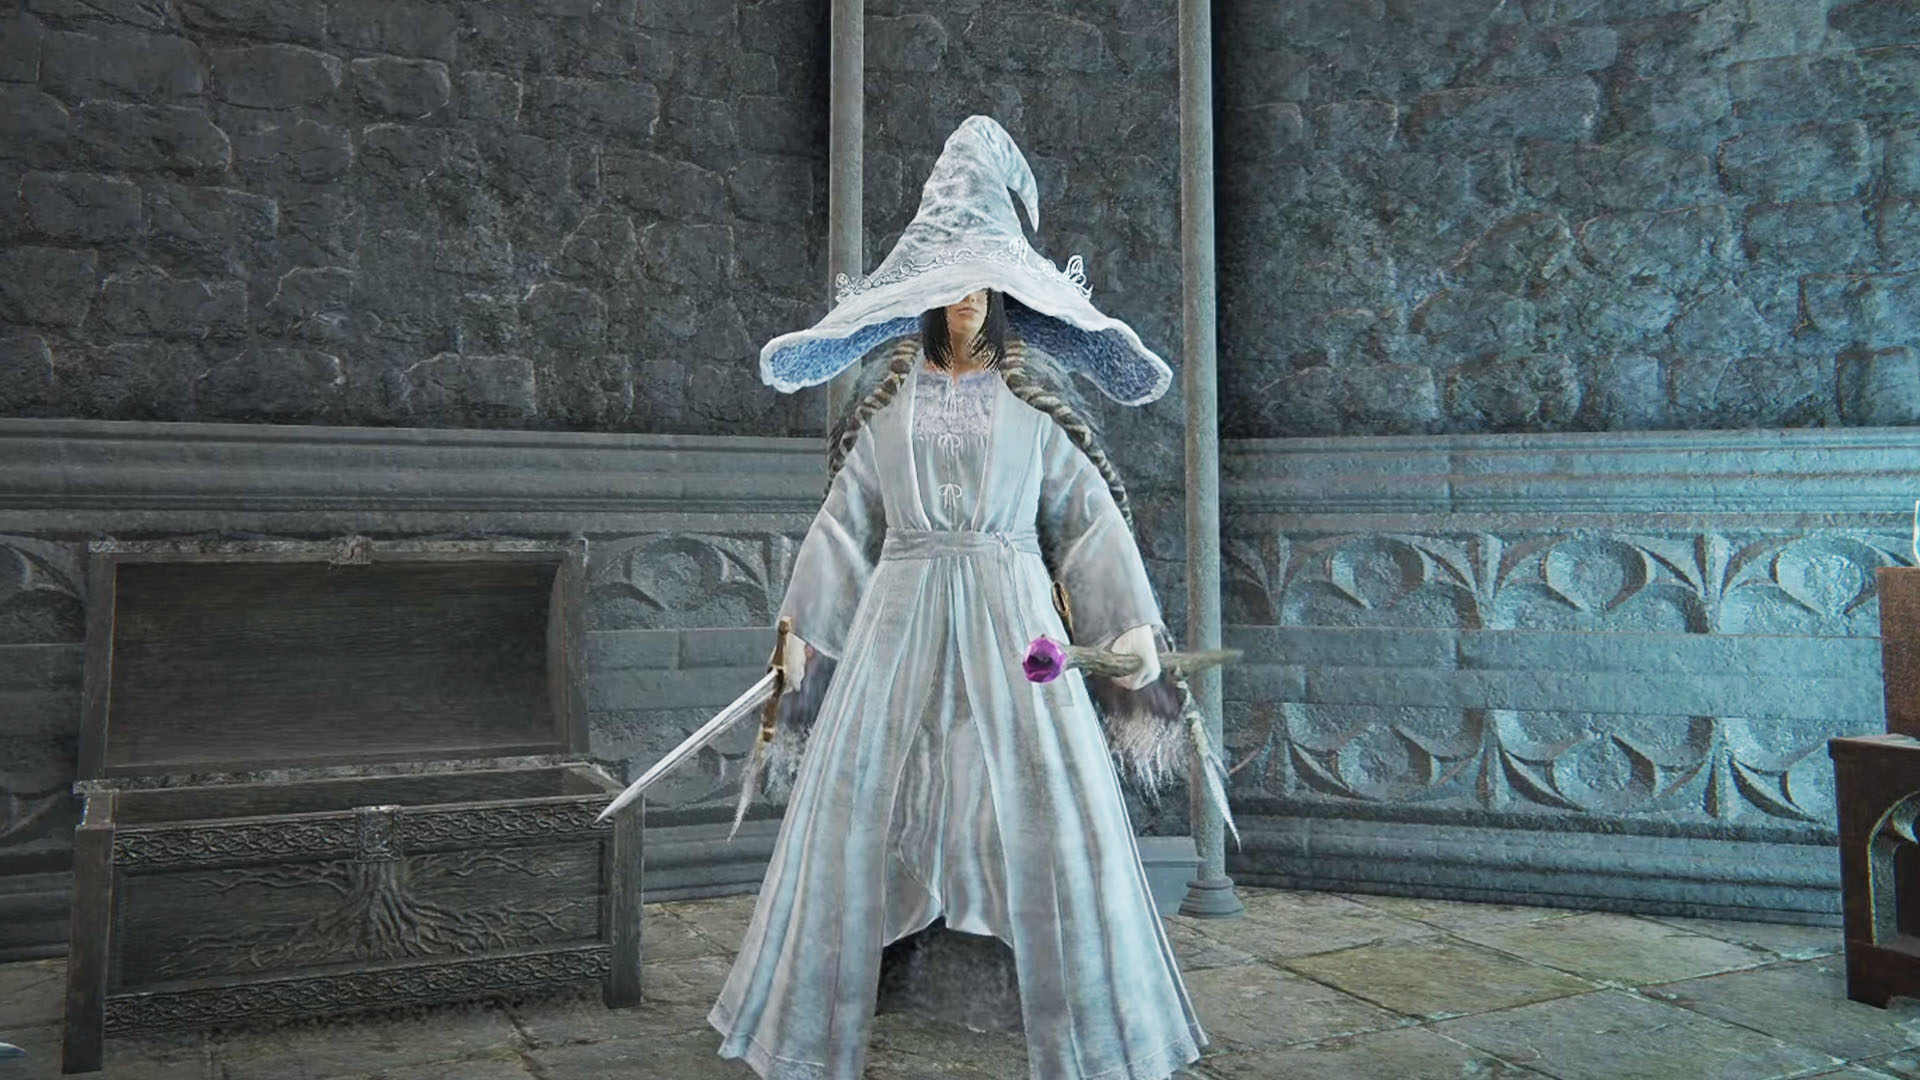 Elden Ring Ranni's Outfit Guide - How to Get the Snow Witch Armor